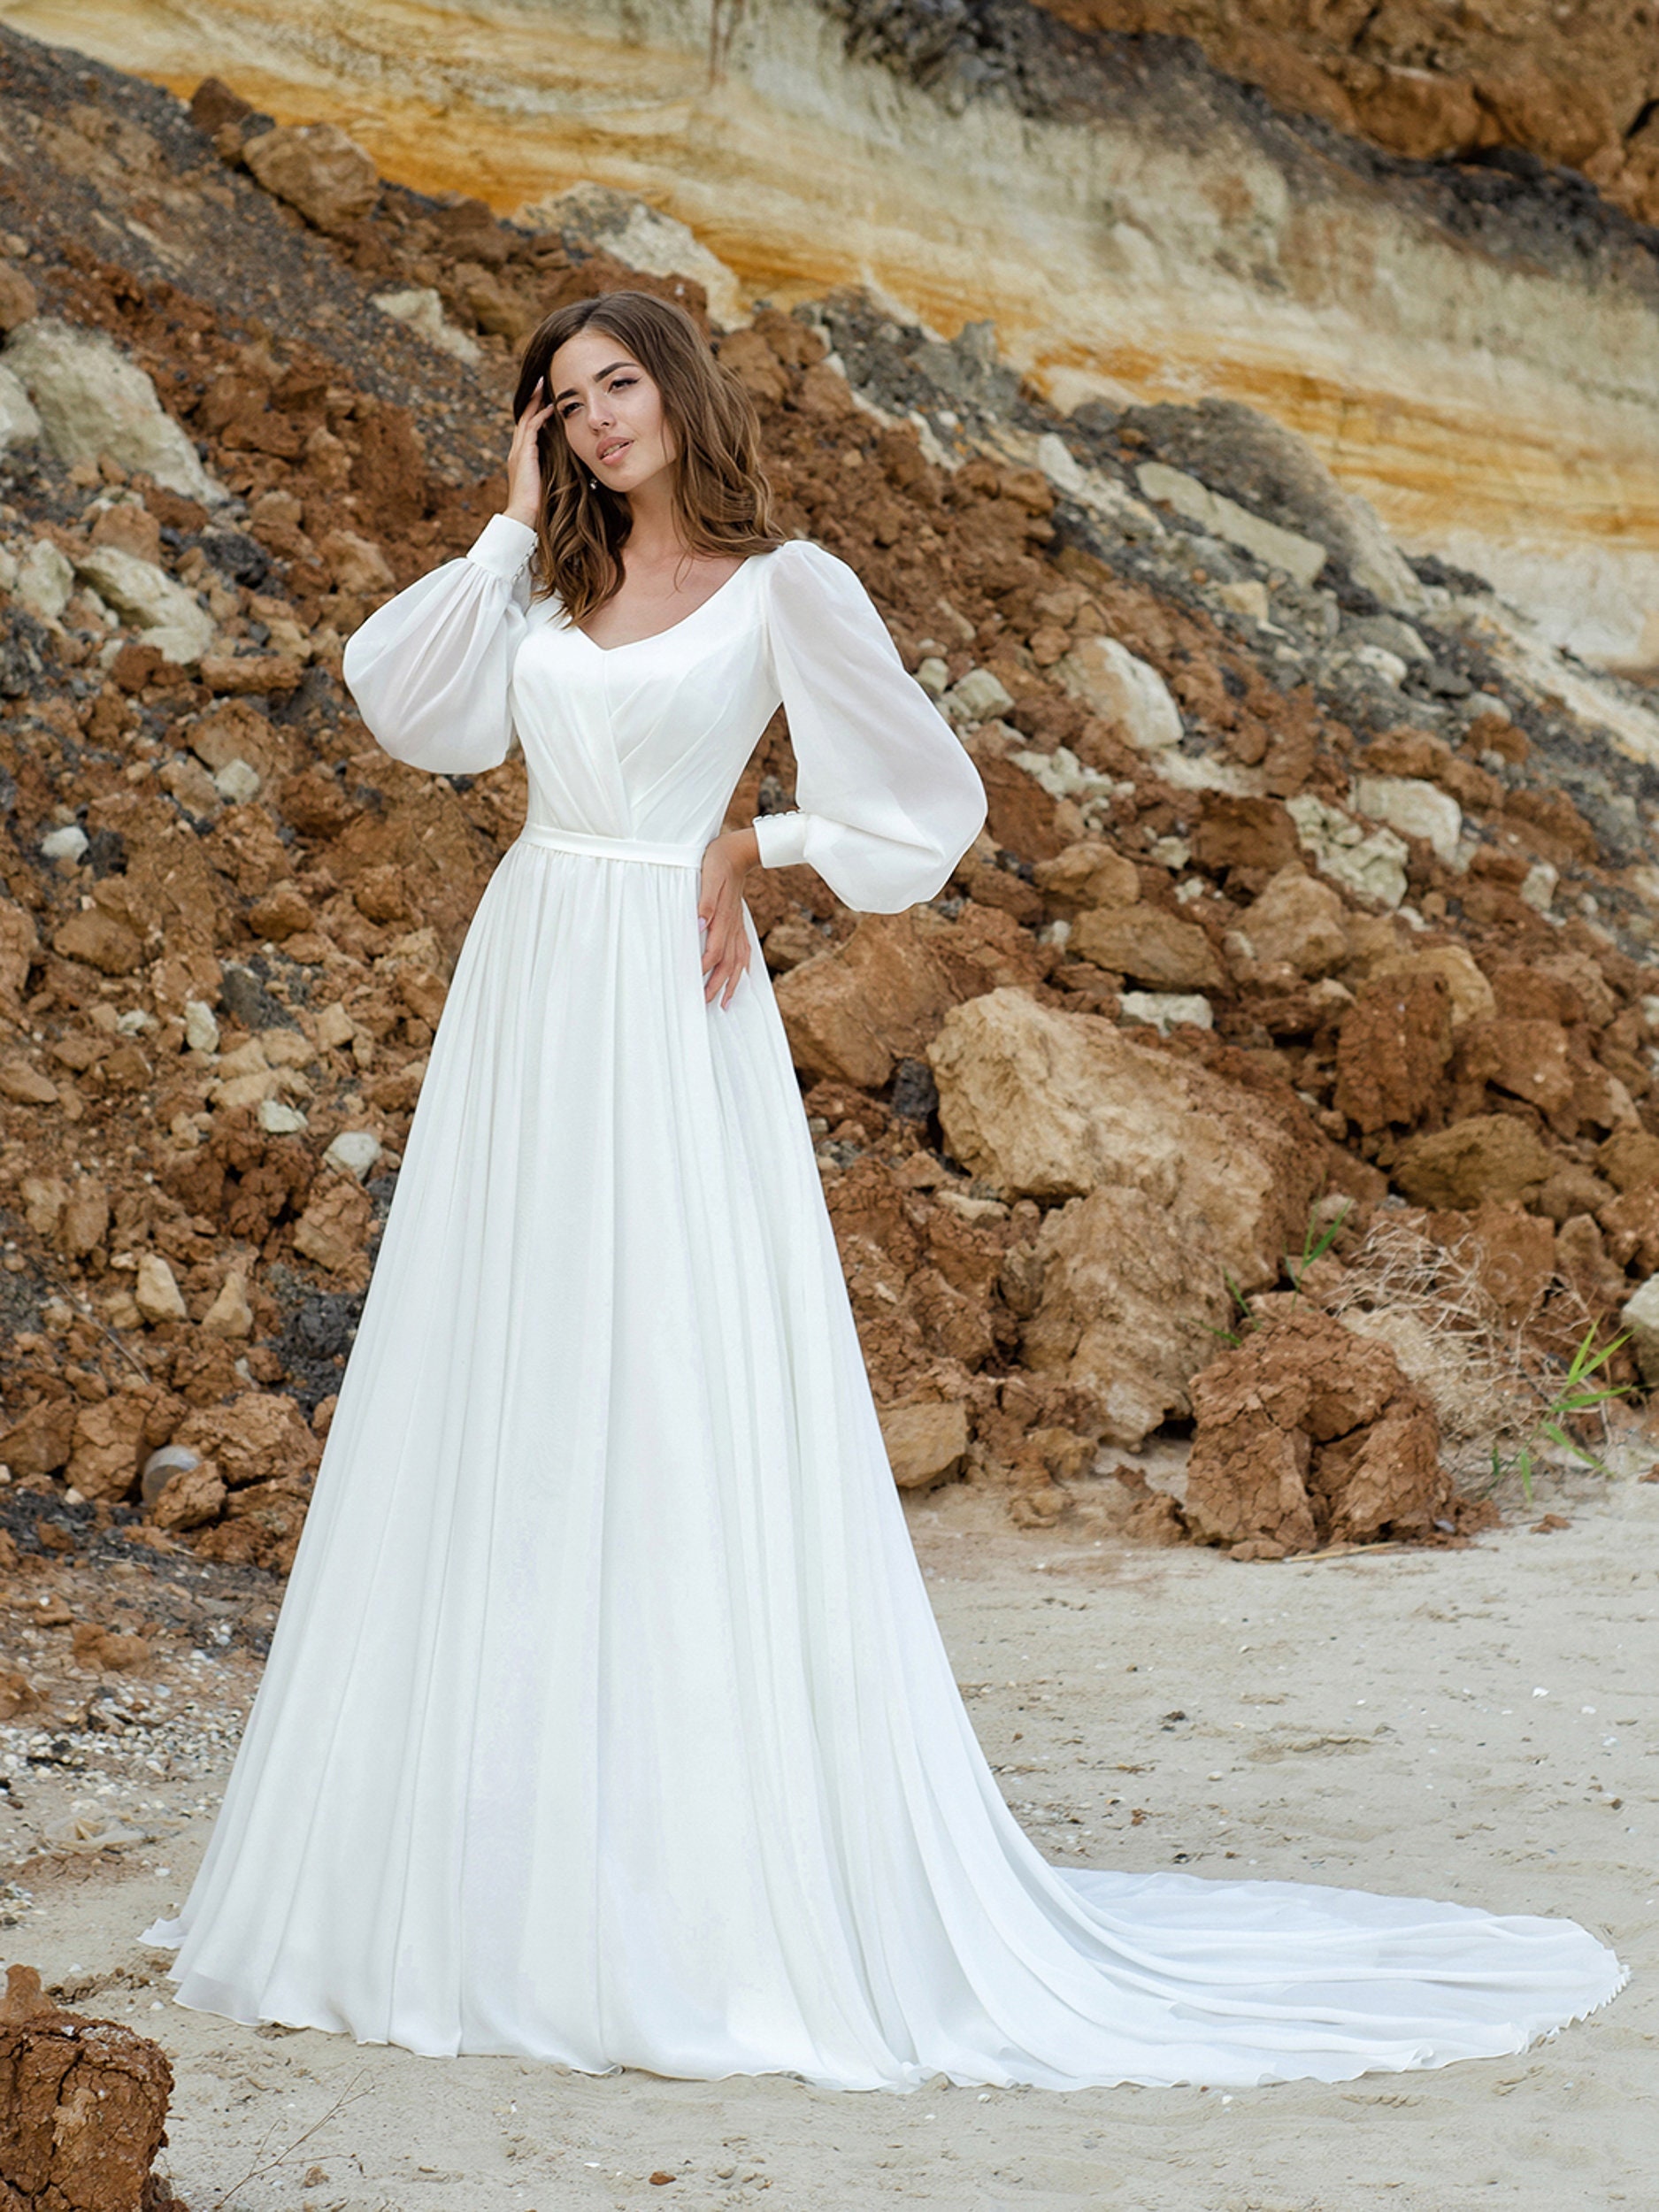 A-line Bridal Gown With Long Traine, Romantic Wedding Dress With Long  Sleeves, Simple Rustic Wedding Dress, Chiffon Minimalism Wedding Dress 